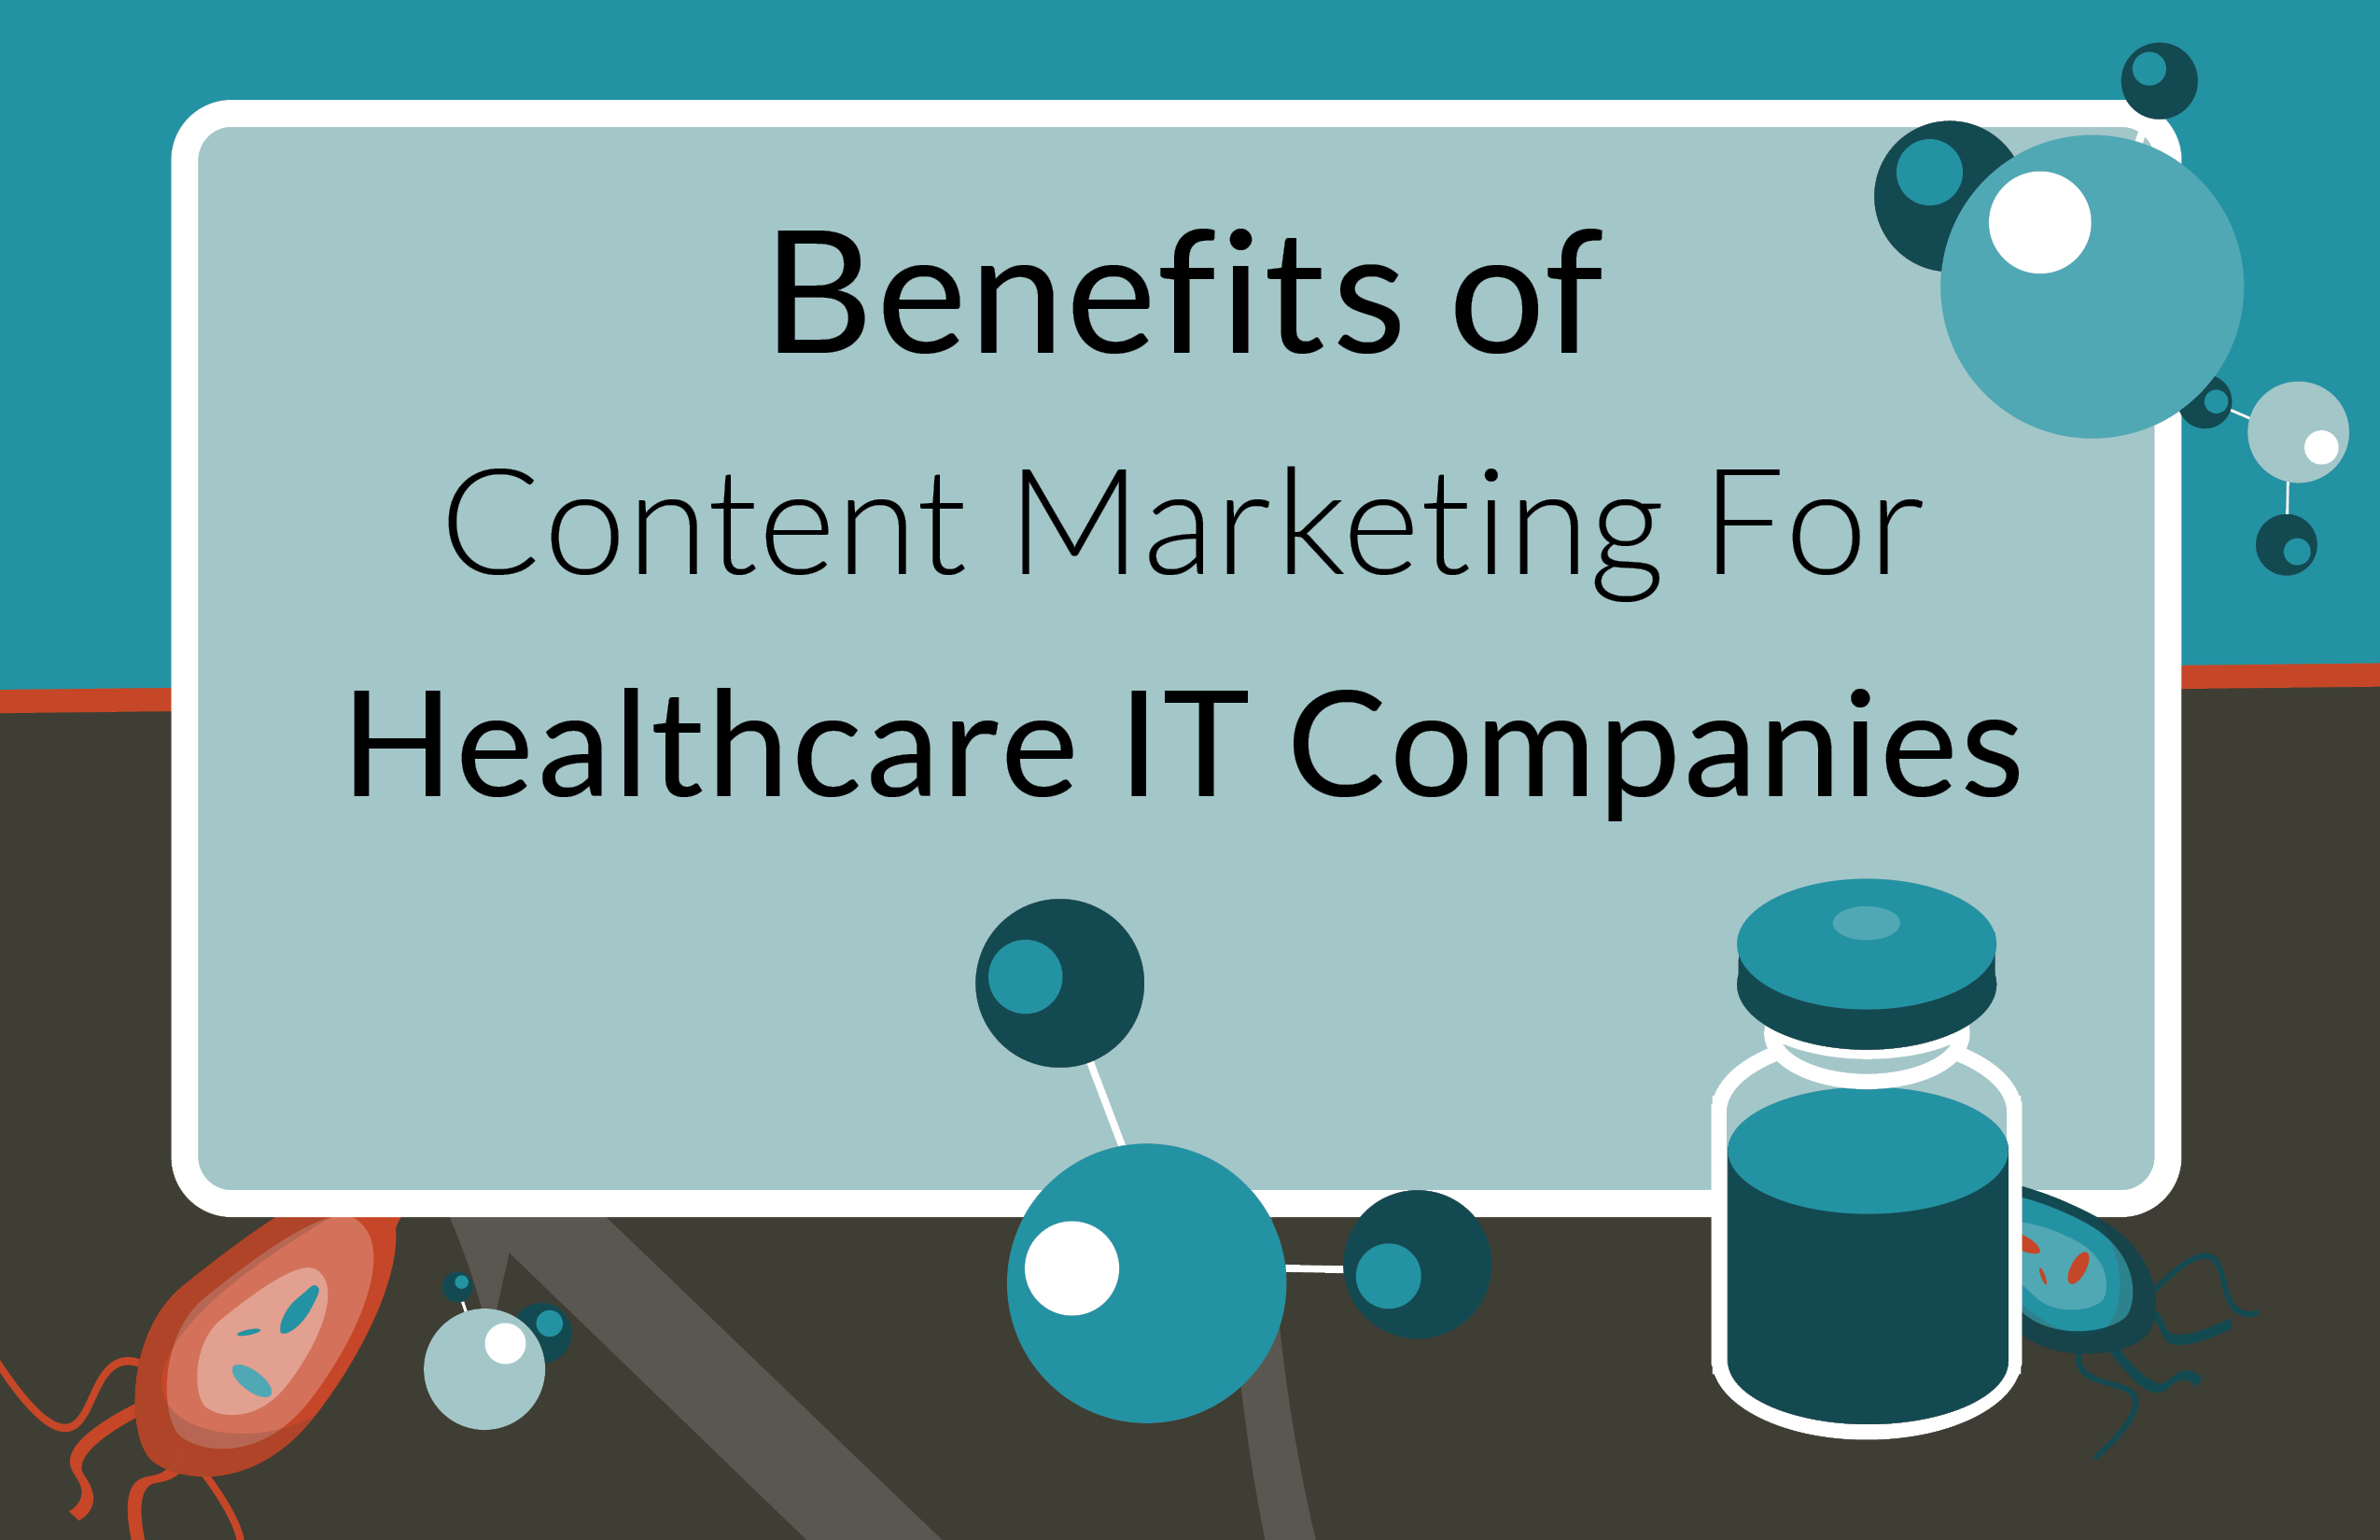 Benefits of Content Marketing For Healthcare IT Companies